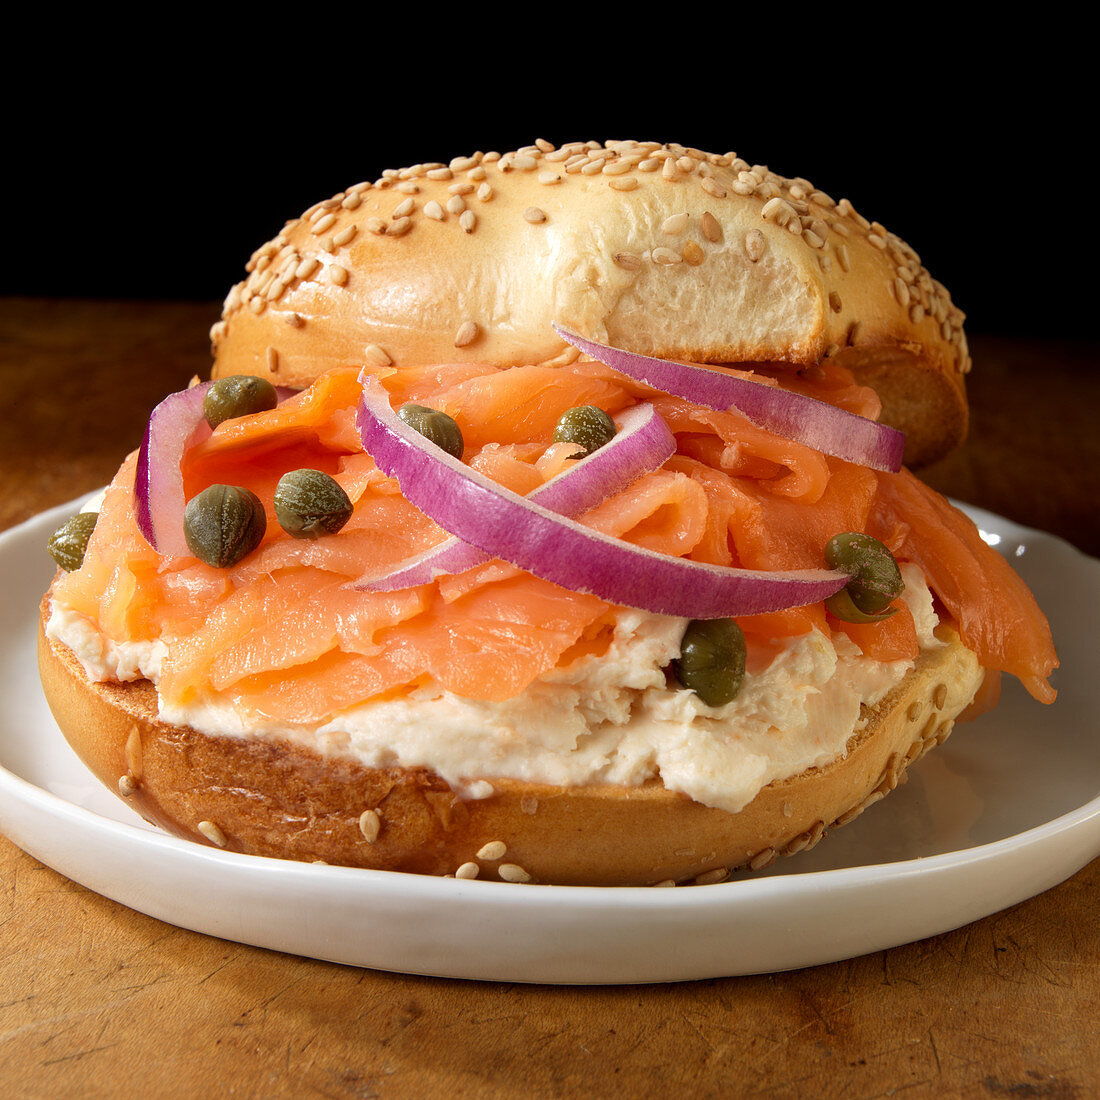 Salmon and cream cheese on sesame bagel with capers and red onions